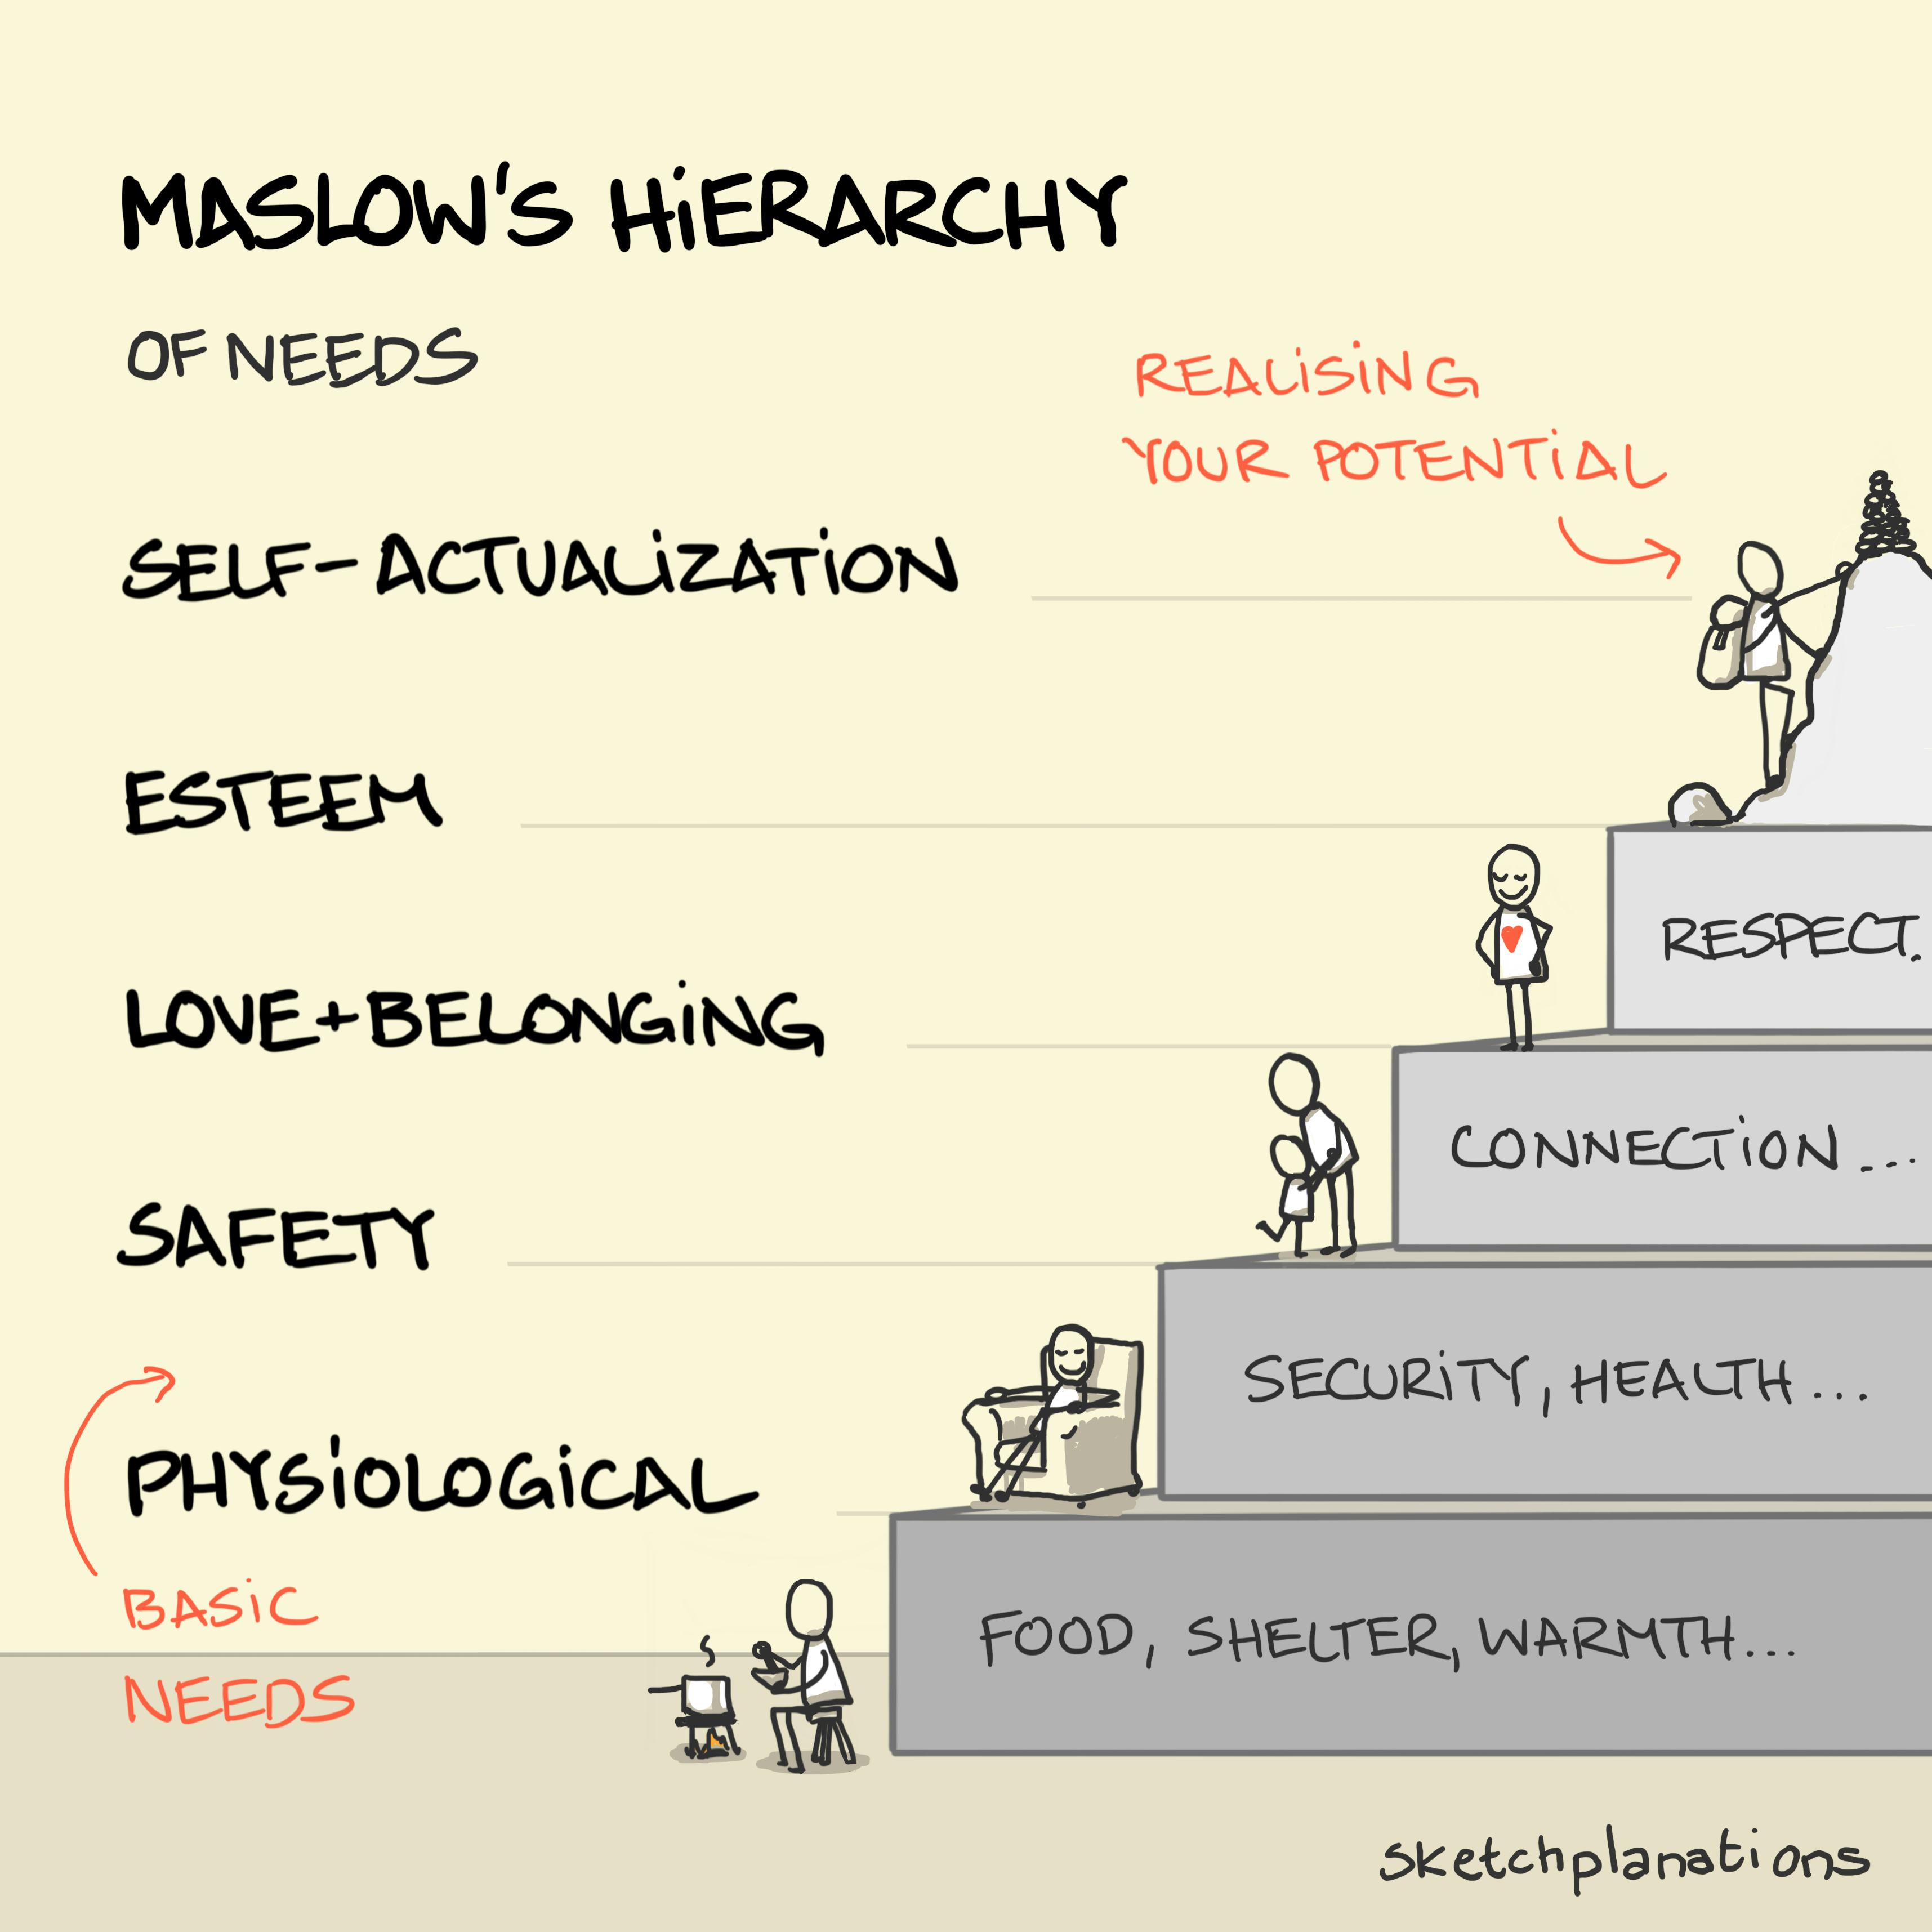 The side of a pyramid of needs: physiological, safety, love-belonging, esteem, self-actualization